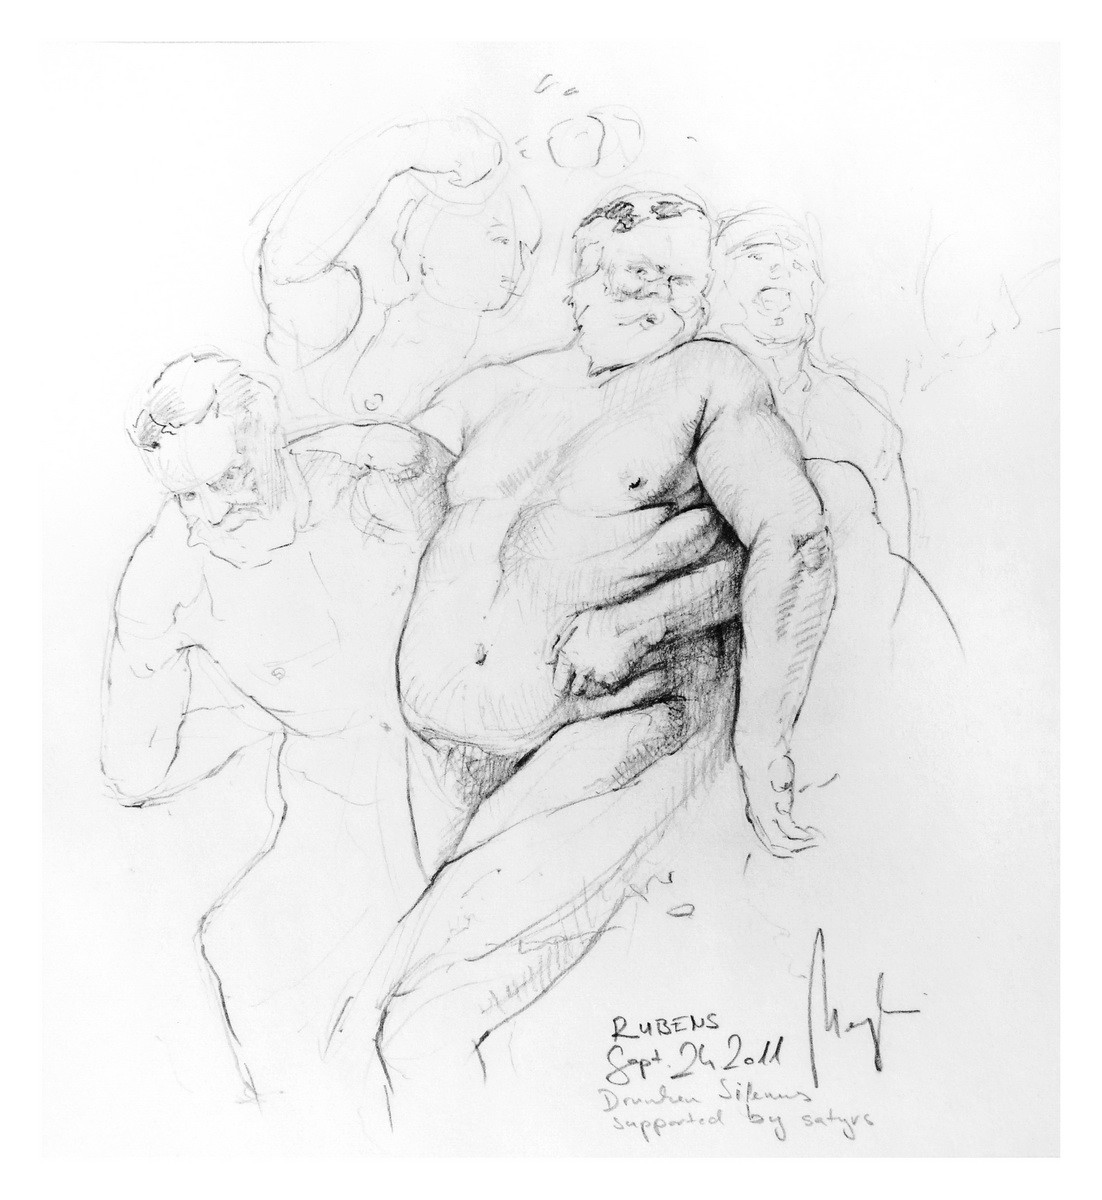 Veronese Study (pencil, paper) / National Gallery, London